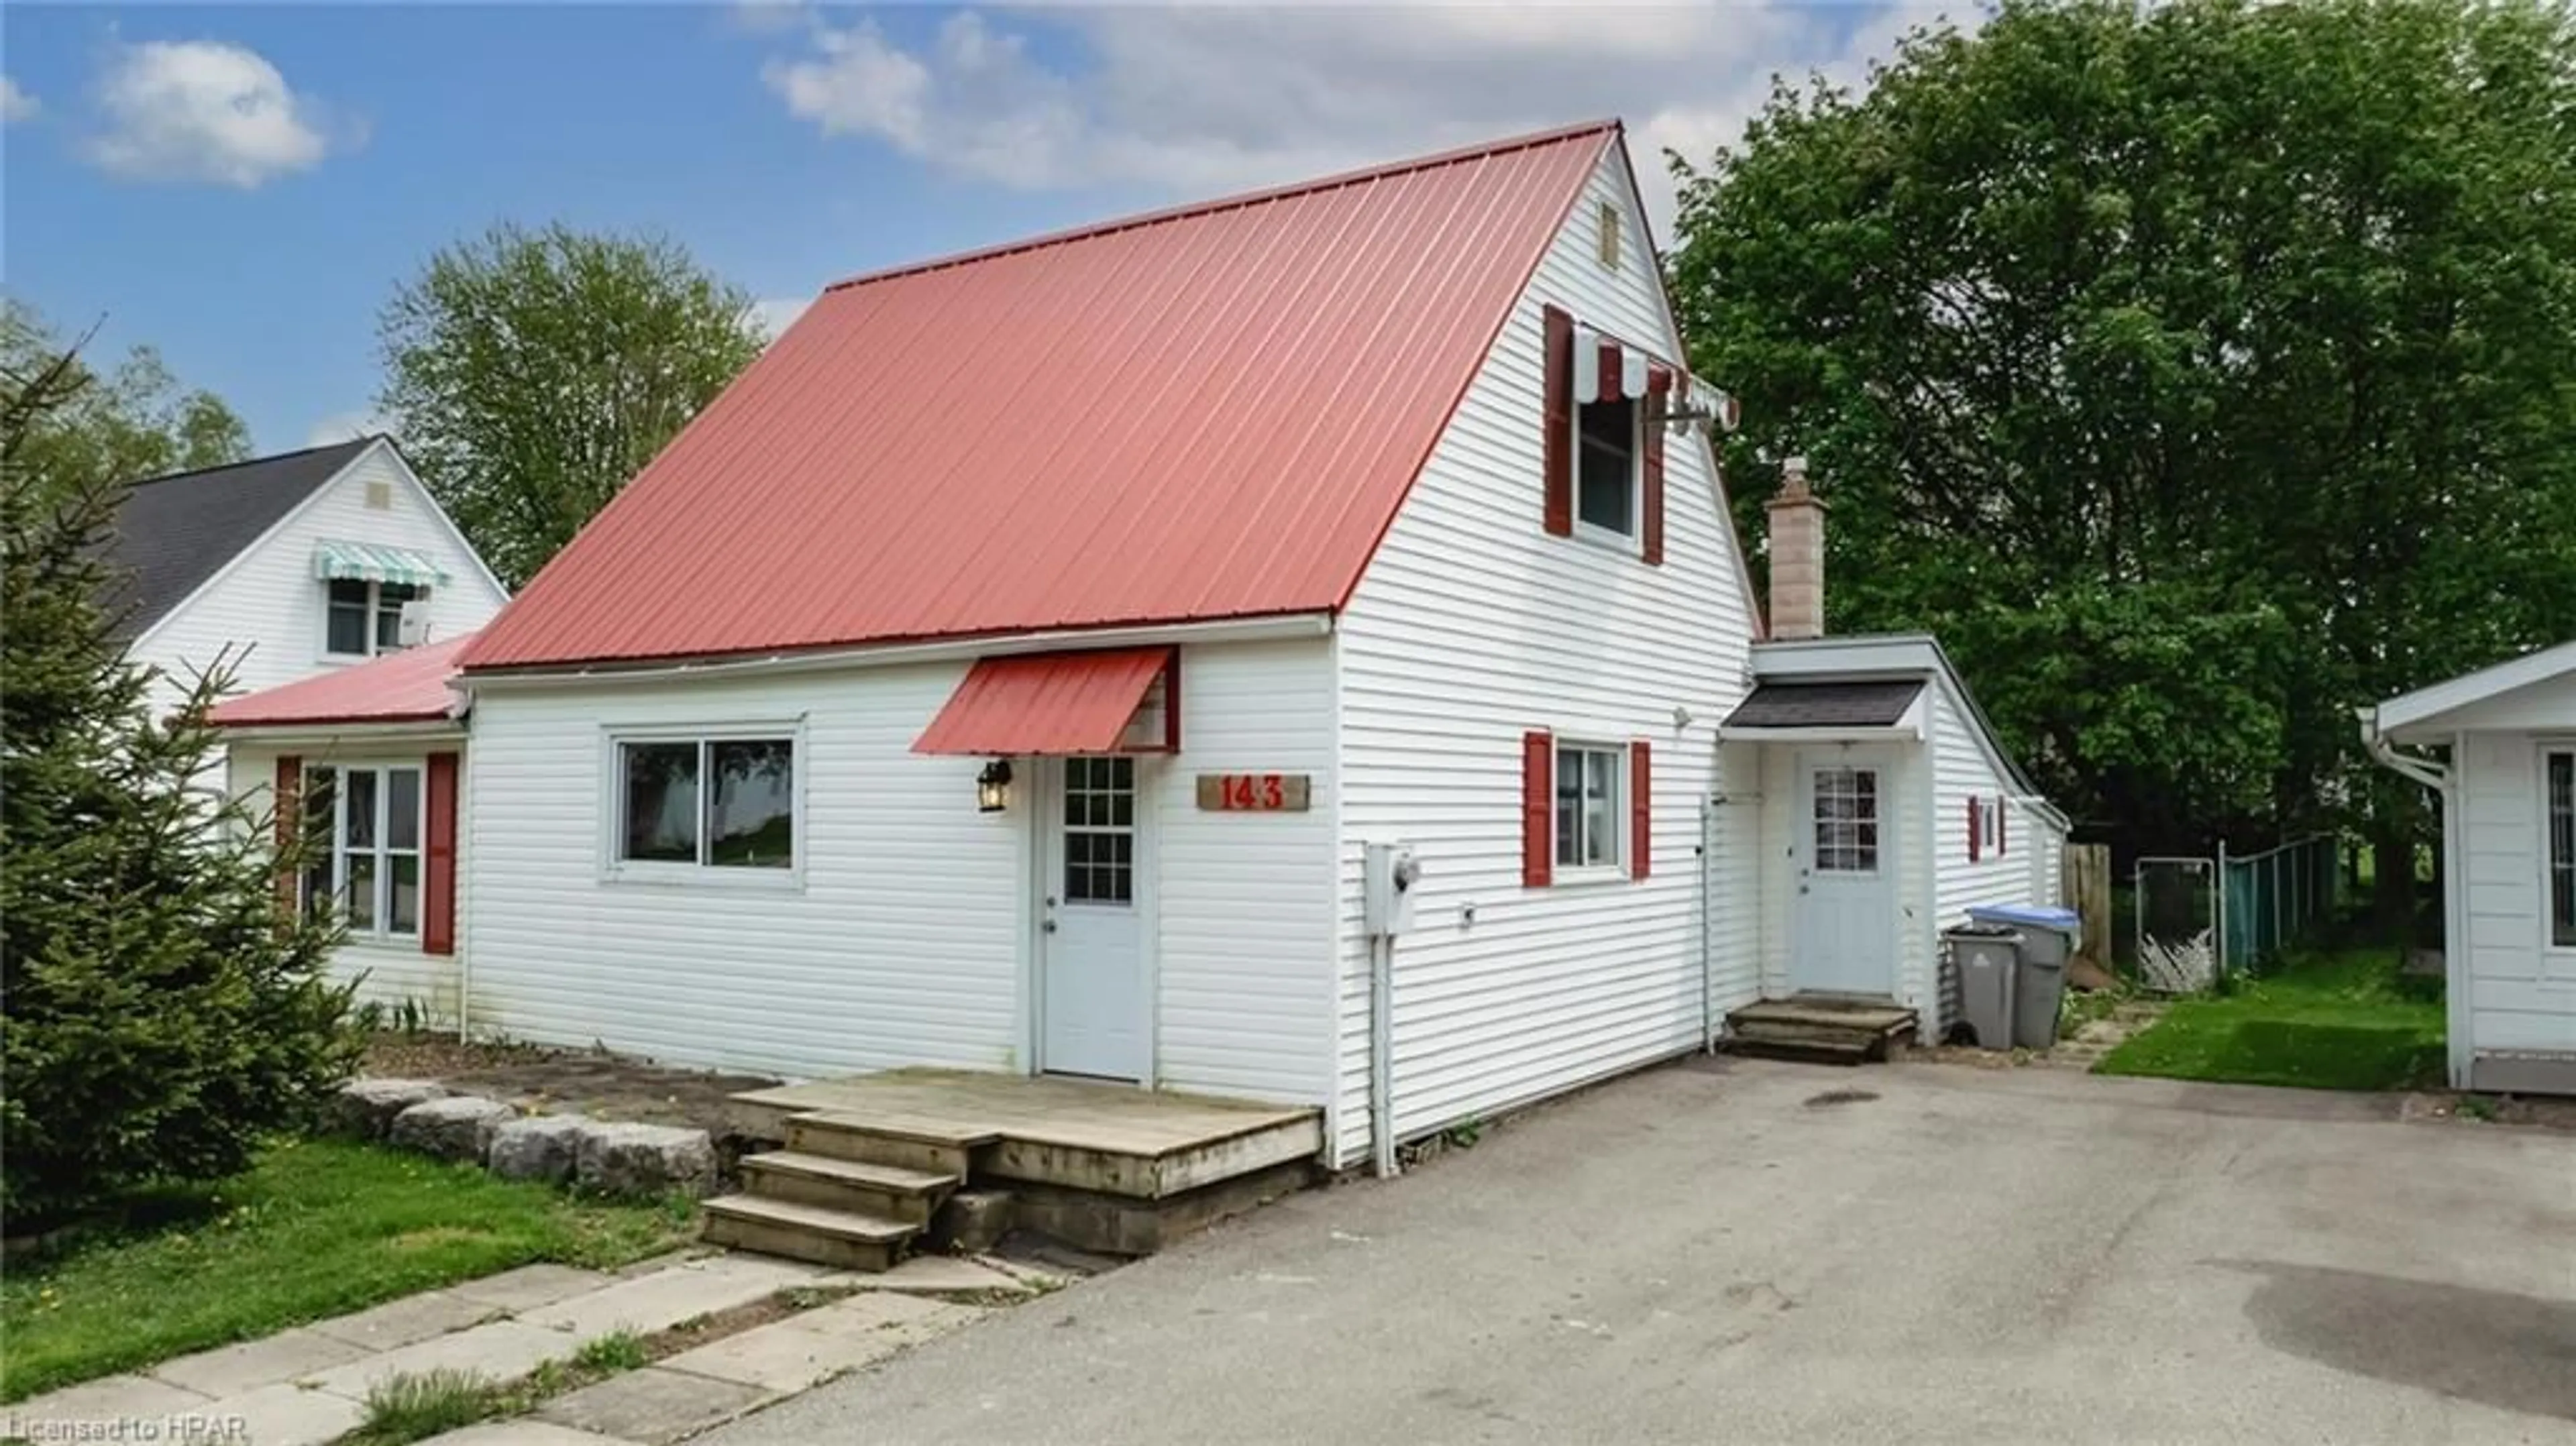 Cottage for 143 Anne St, Exeter Ontario N0M 1S2